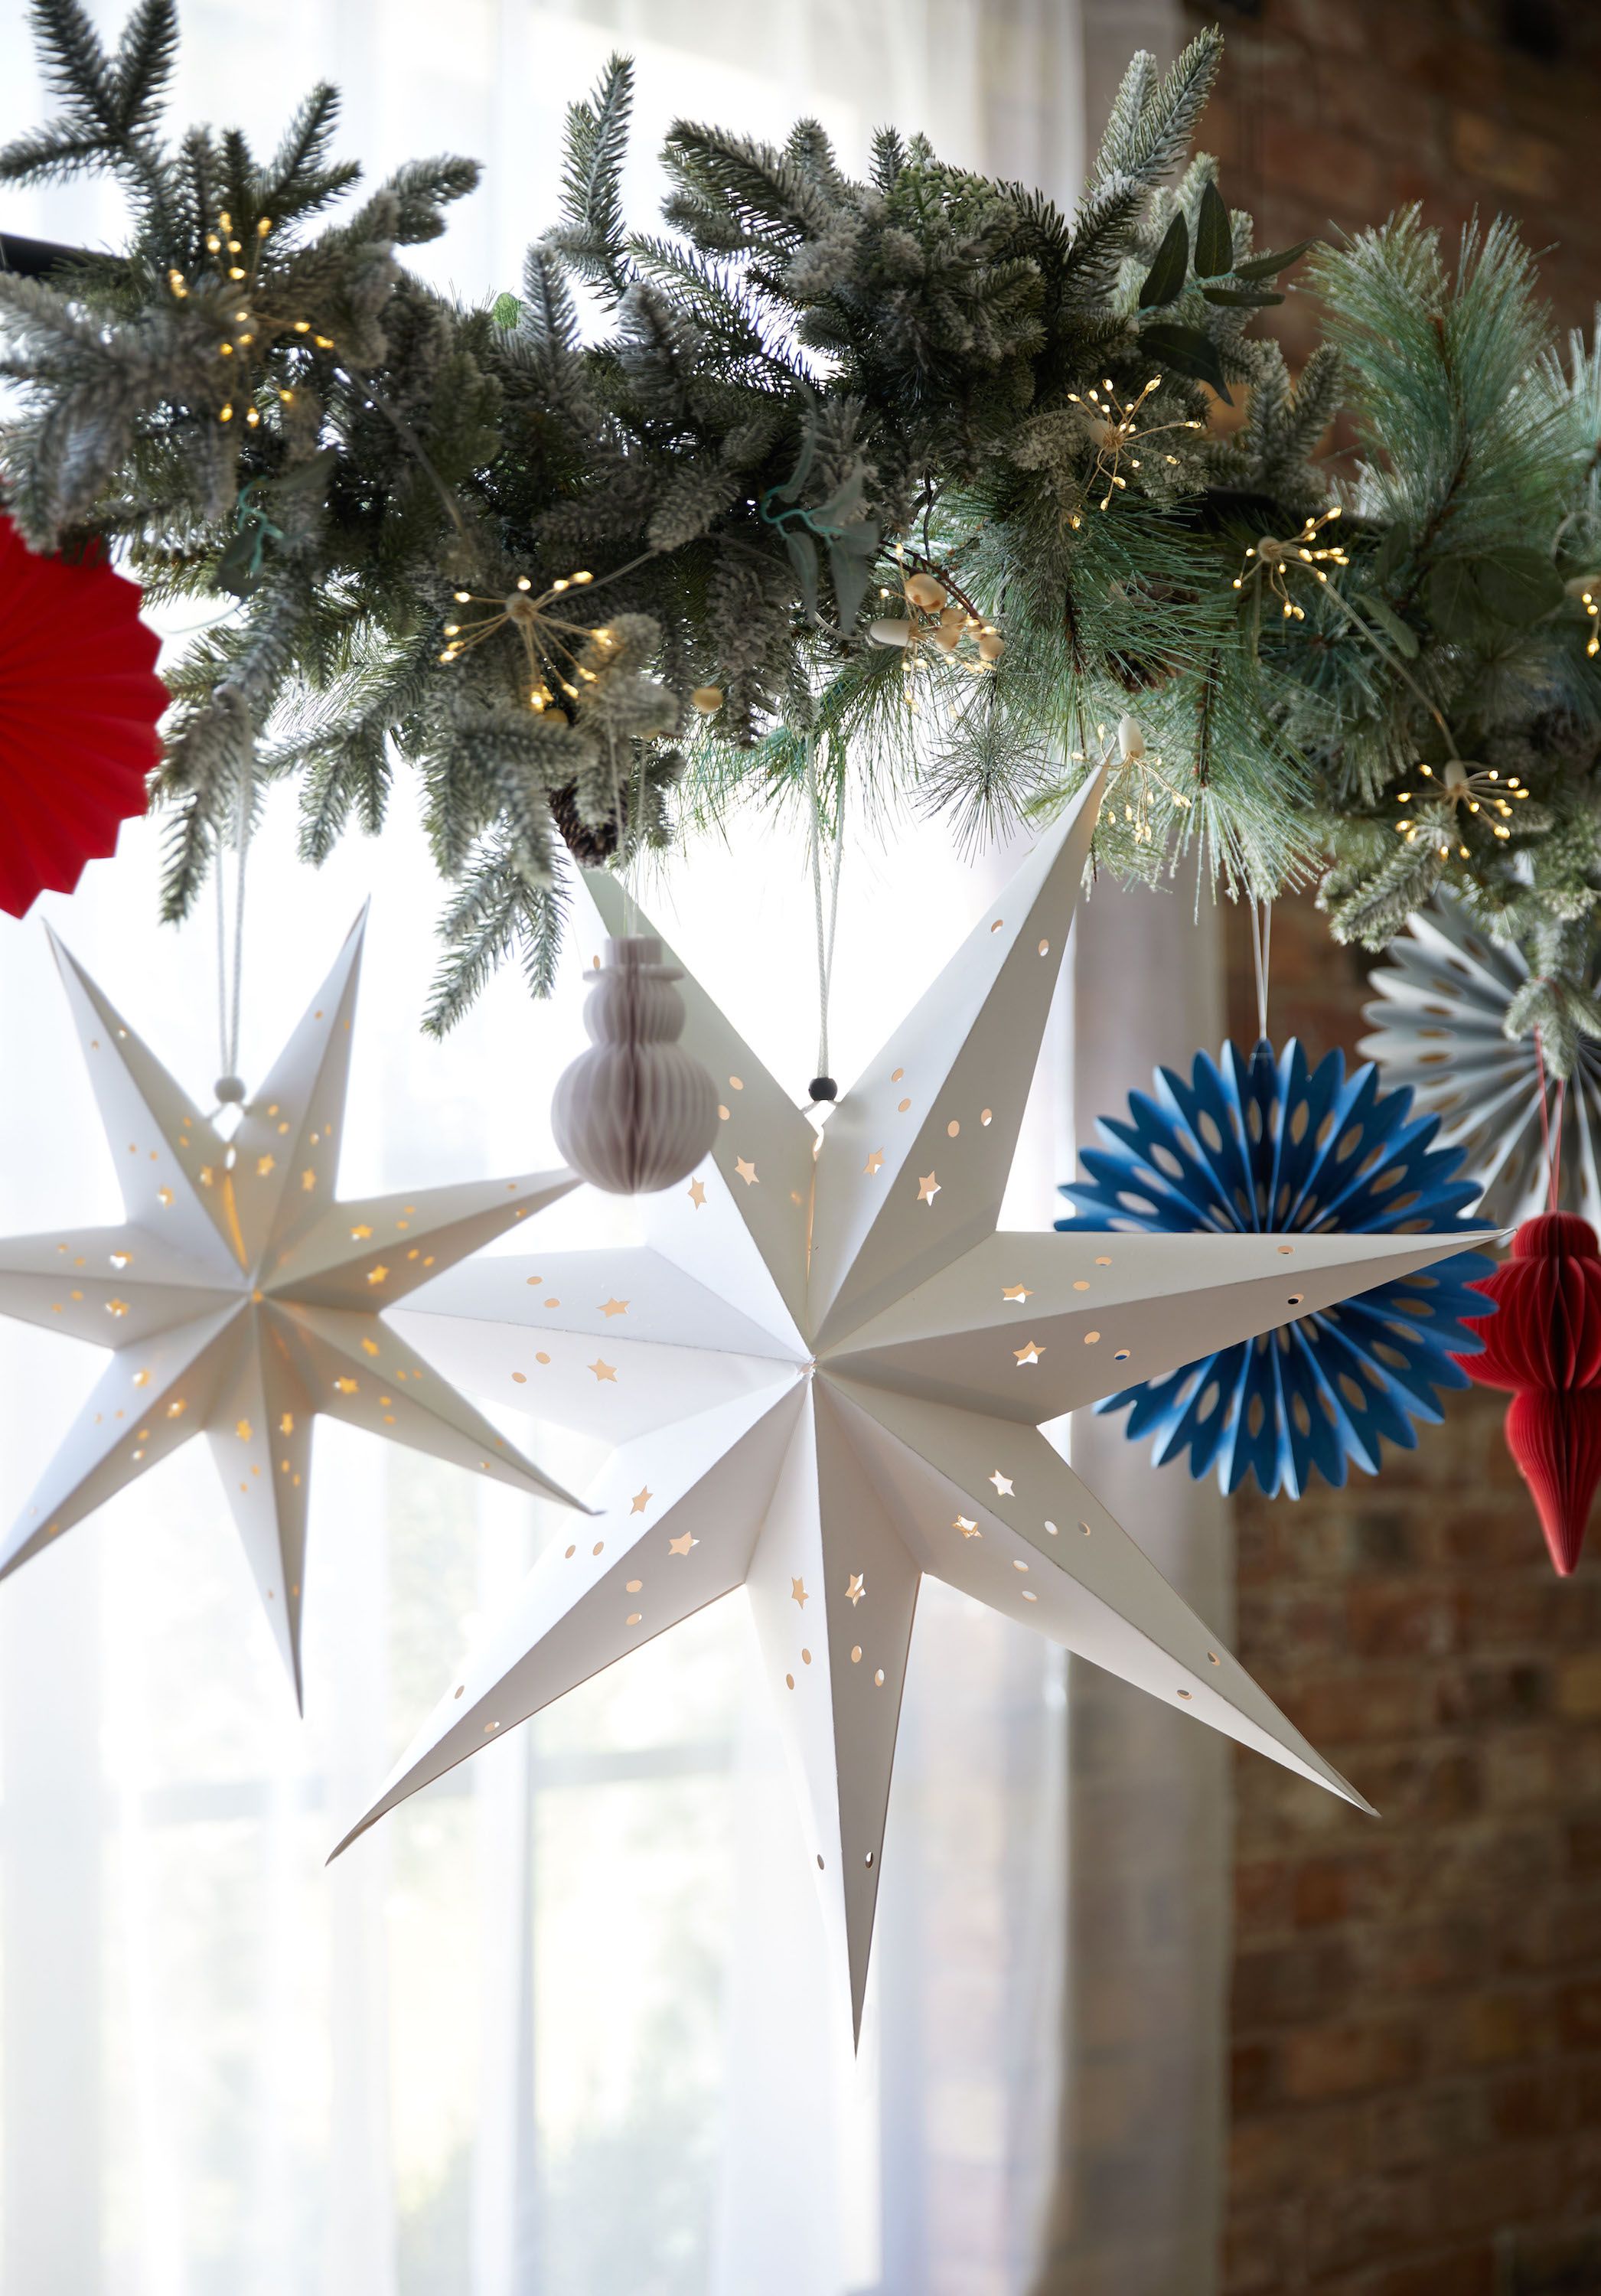 Blue Spotted Hanging Ornaments